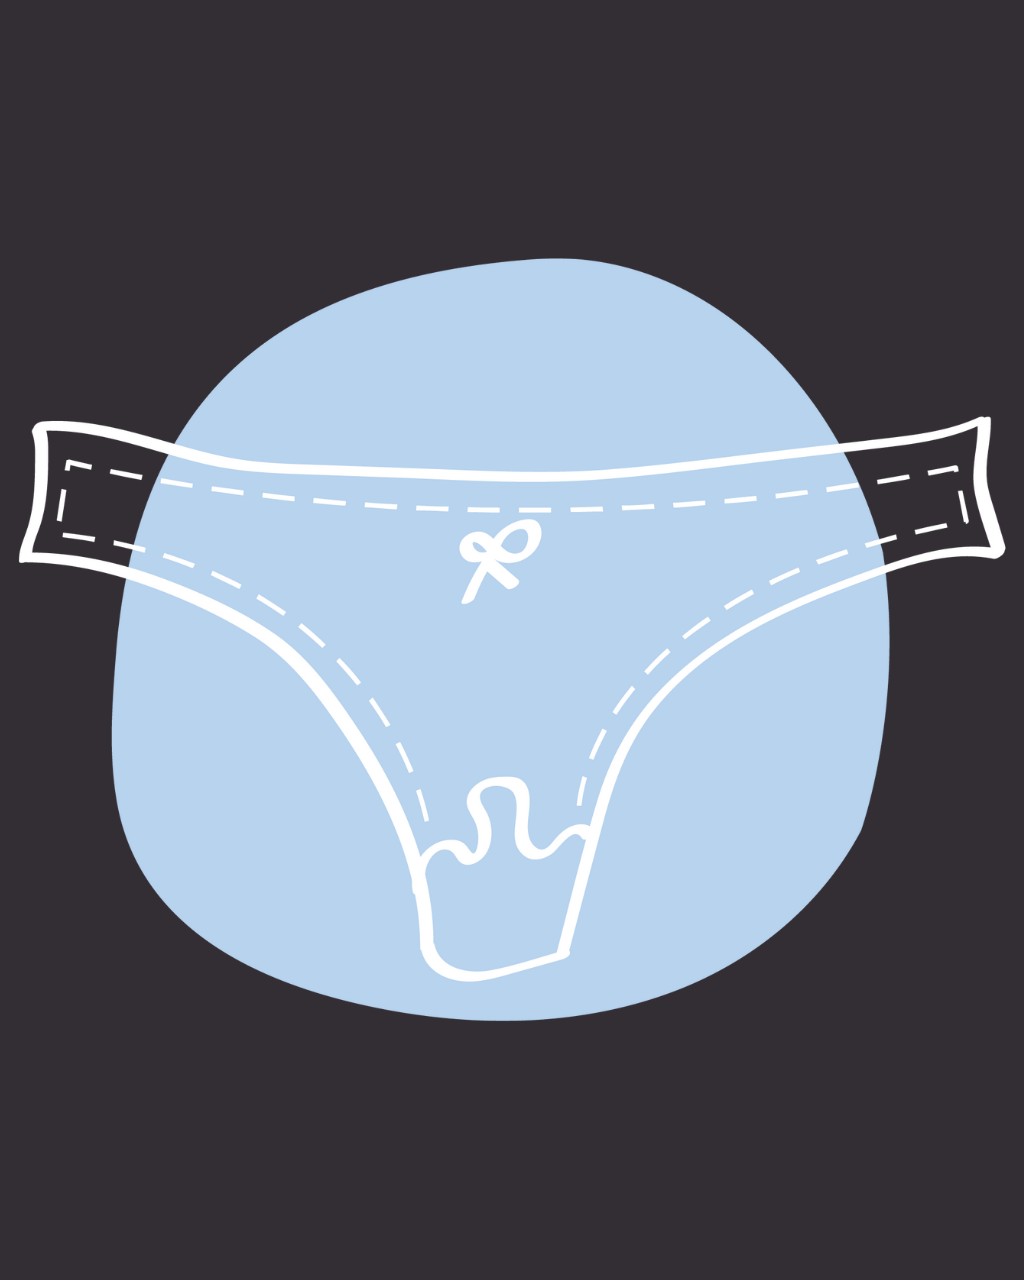 Discharge and Underwear: Is Vaginal Discharge Staining Your